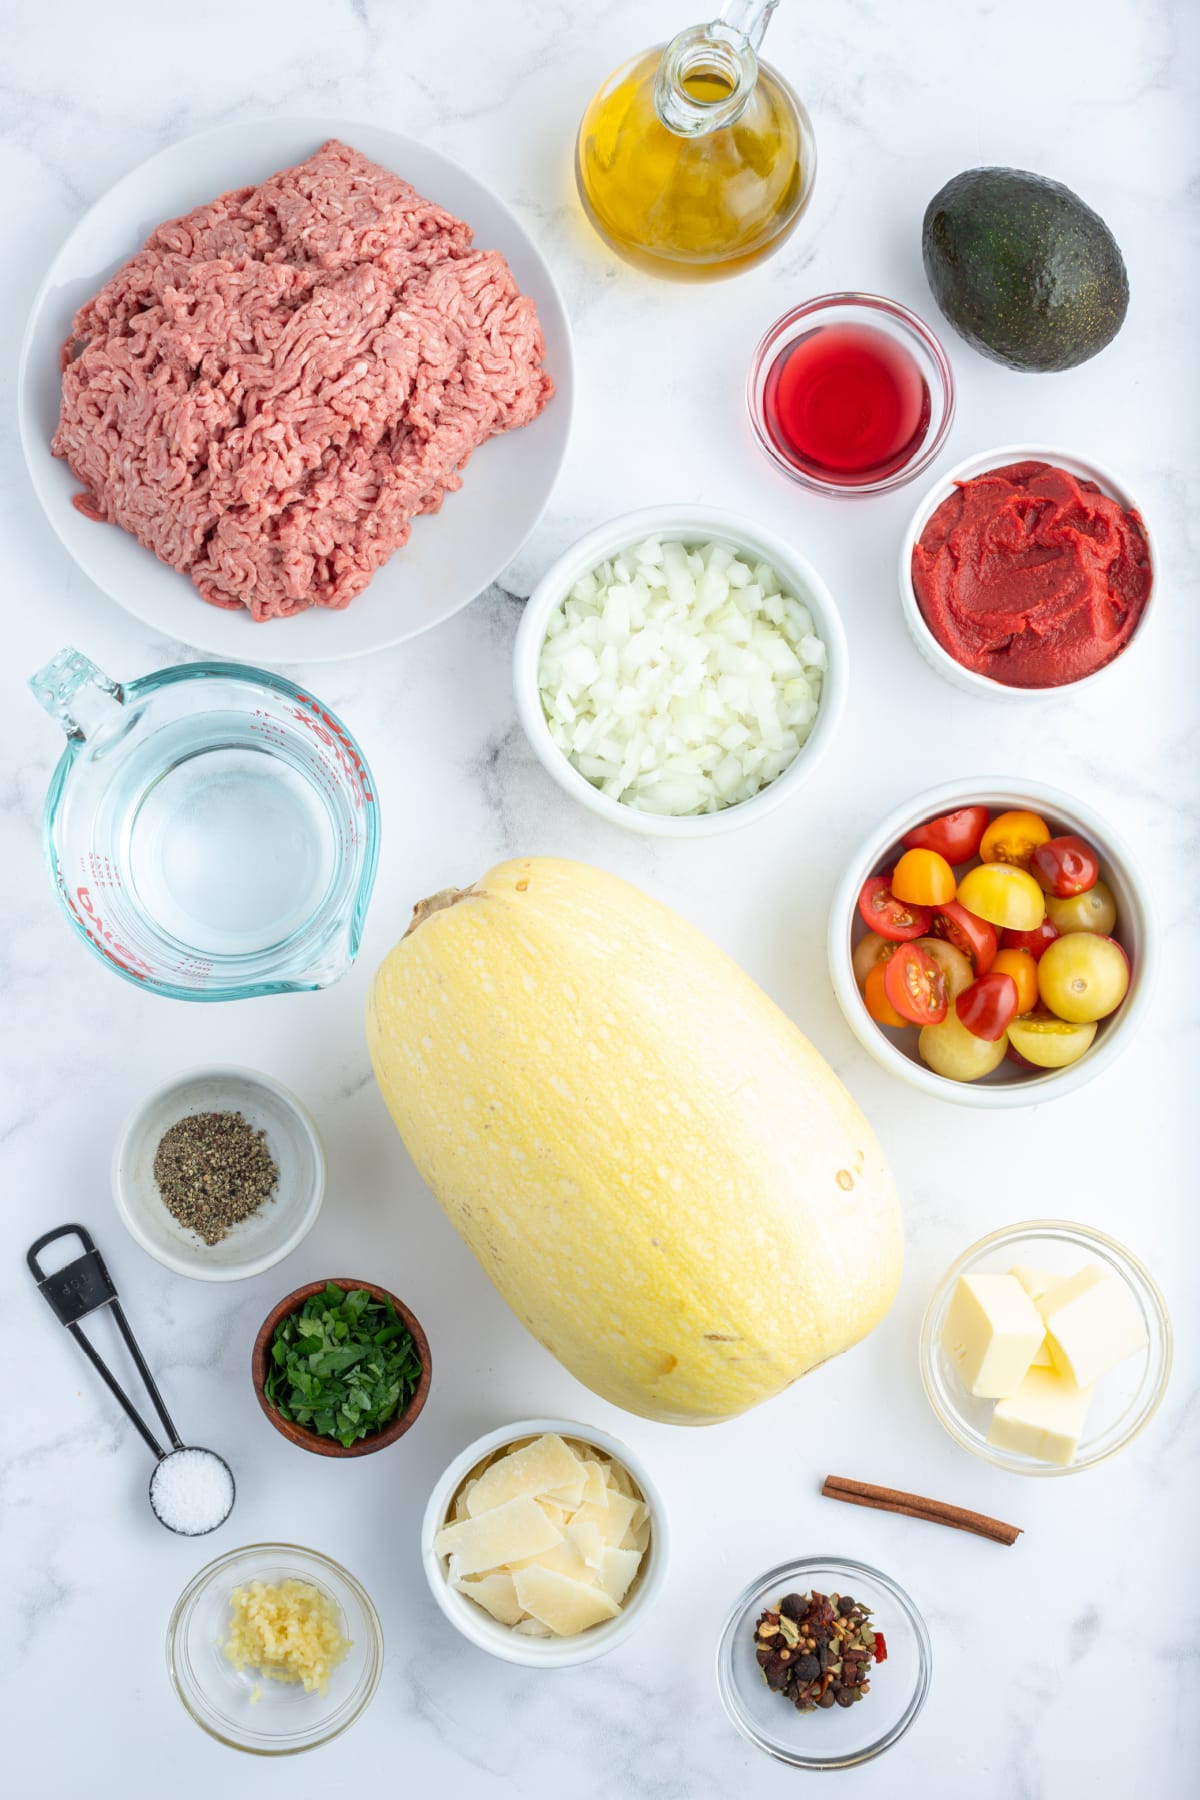 ingredients displayed for making spaghetti squash with spicy meat sauce